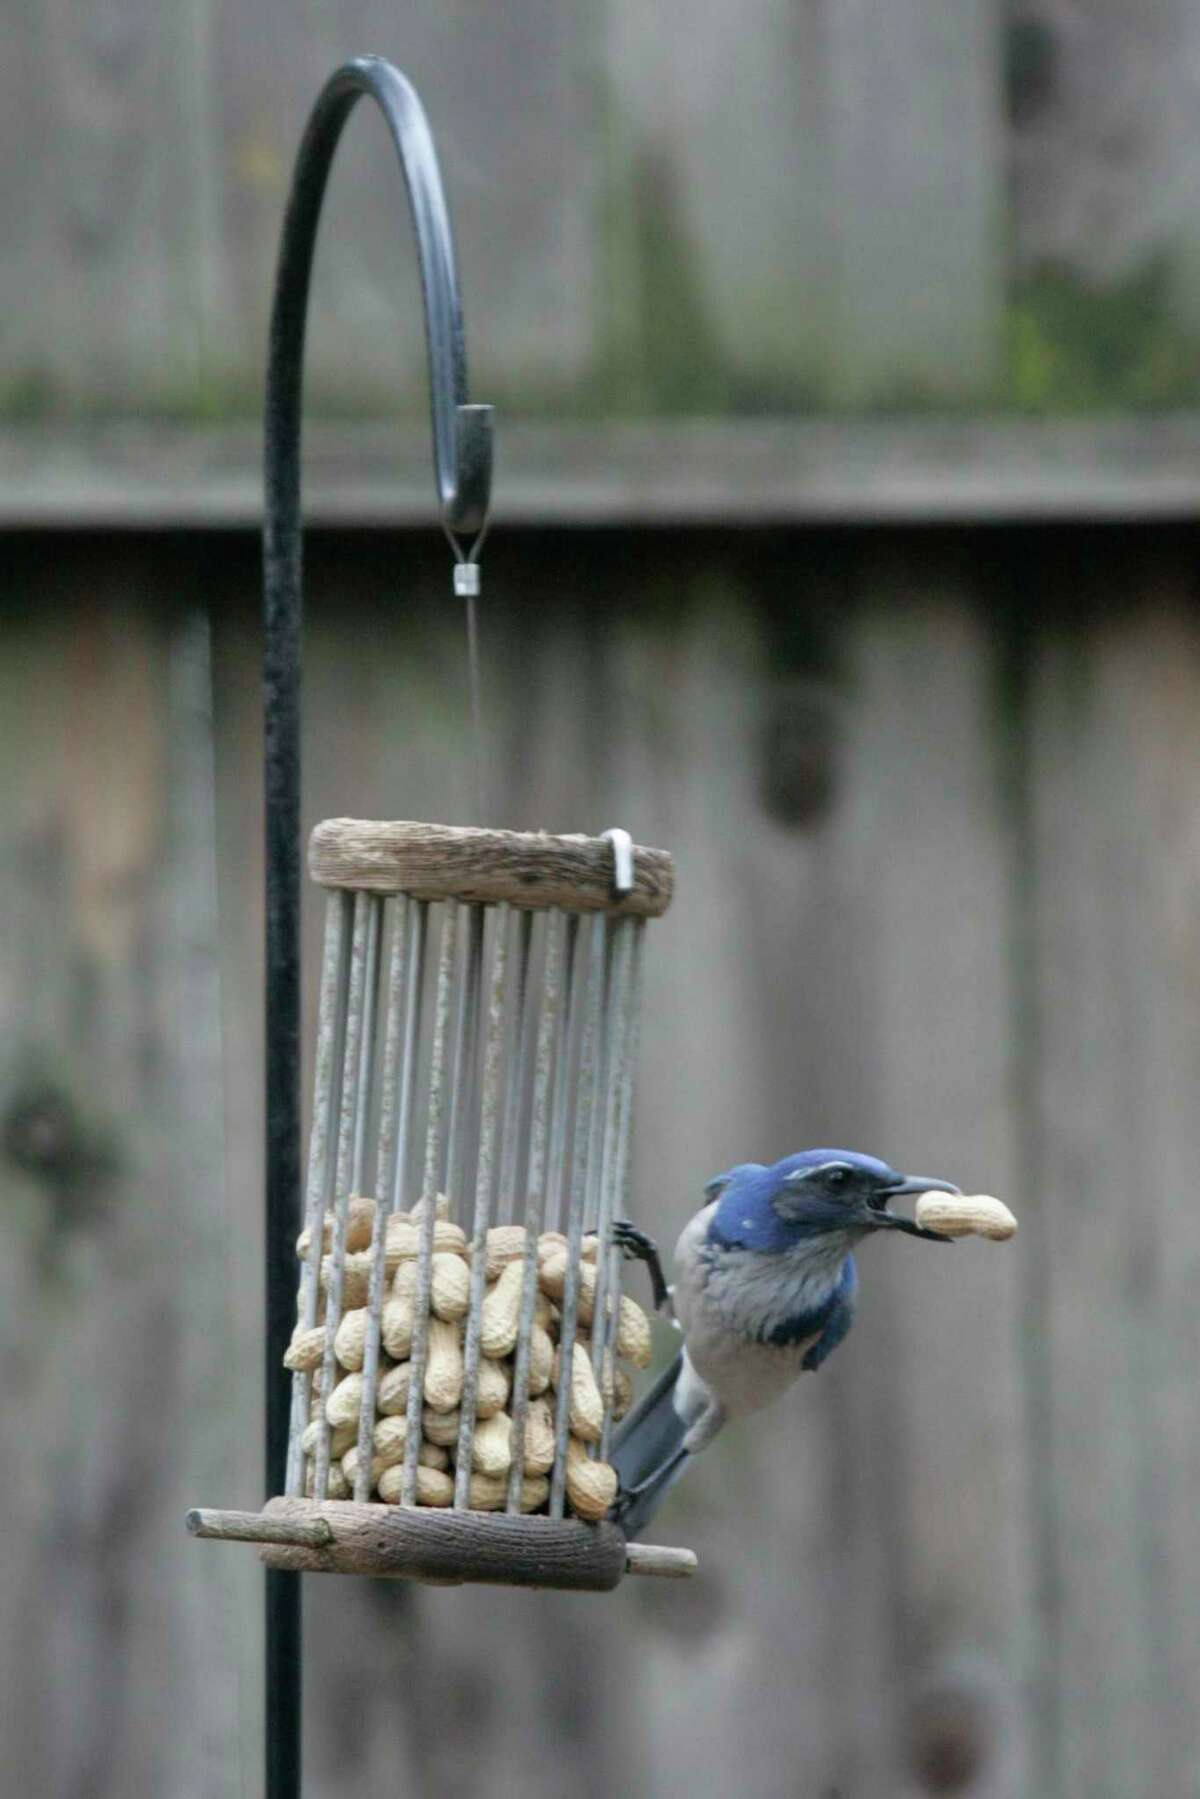 A bluejay takes off with a peanut from a backyard feeder.